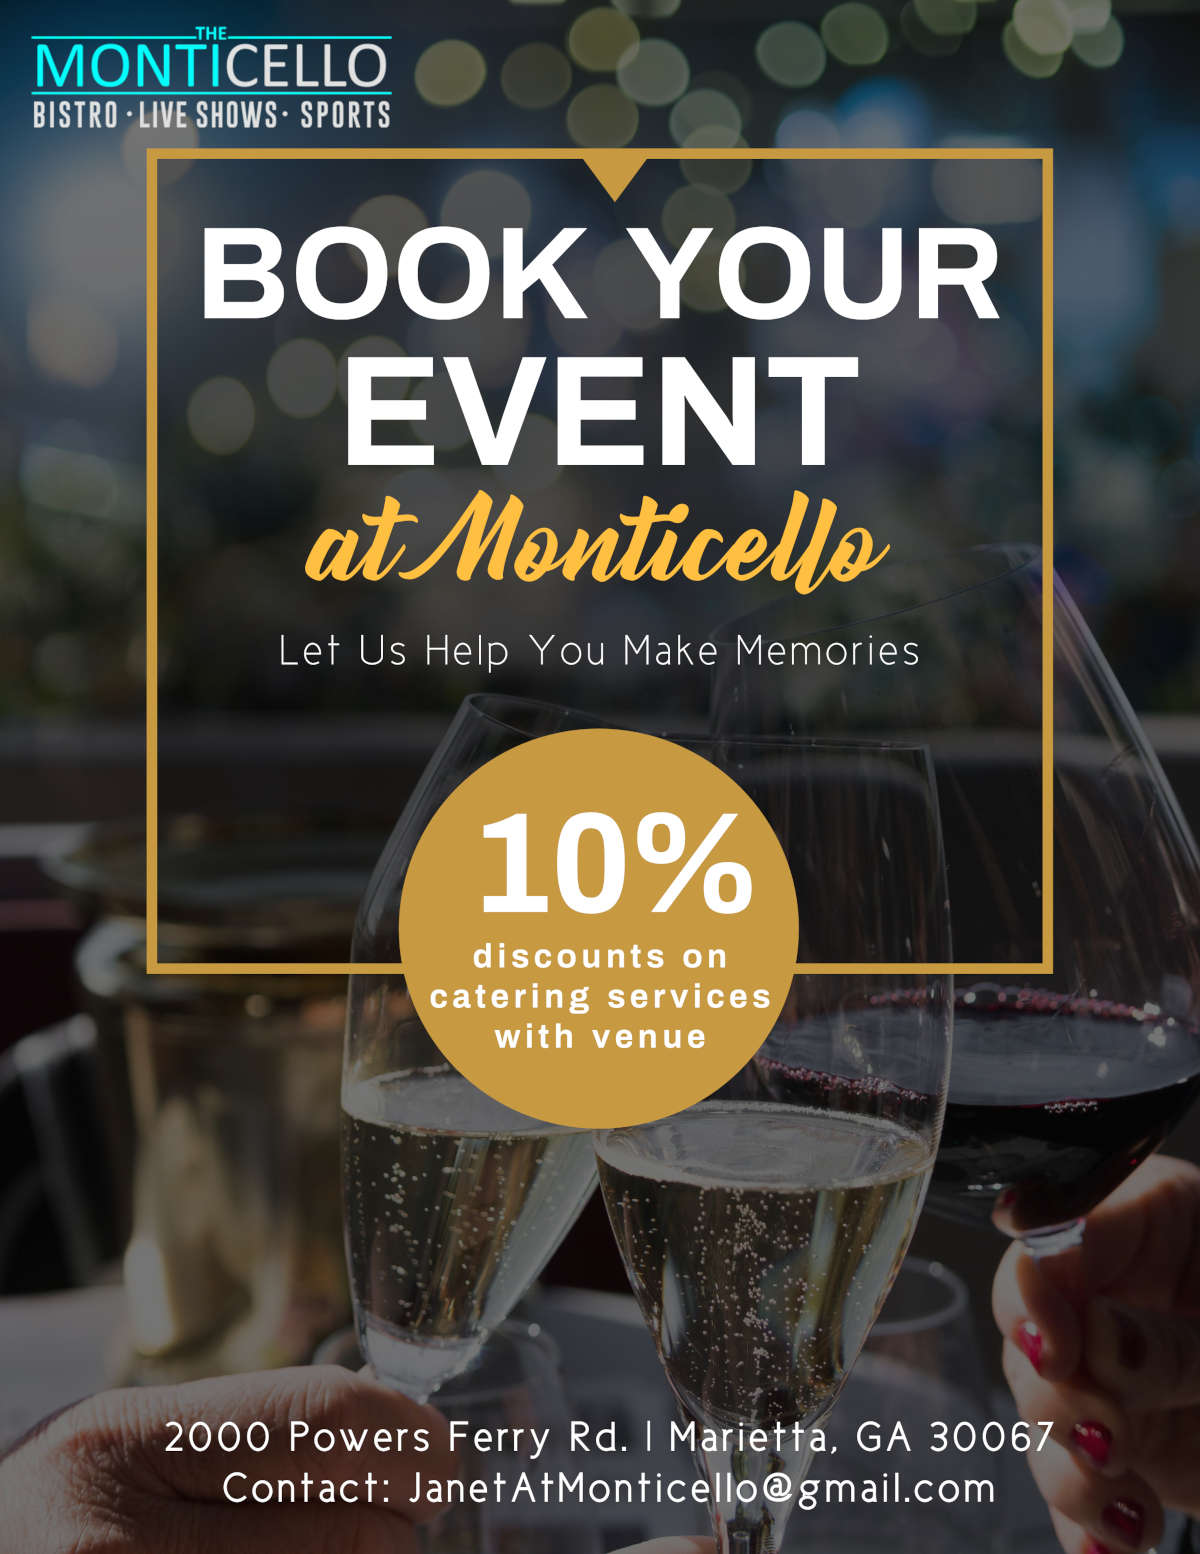 BOOK YOUR EVENT AT MONTICELLO flyer